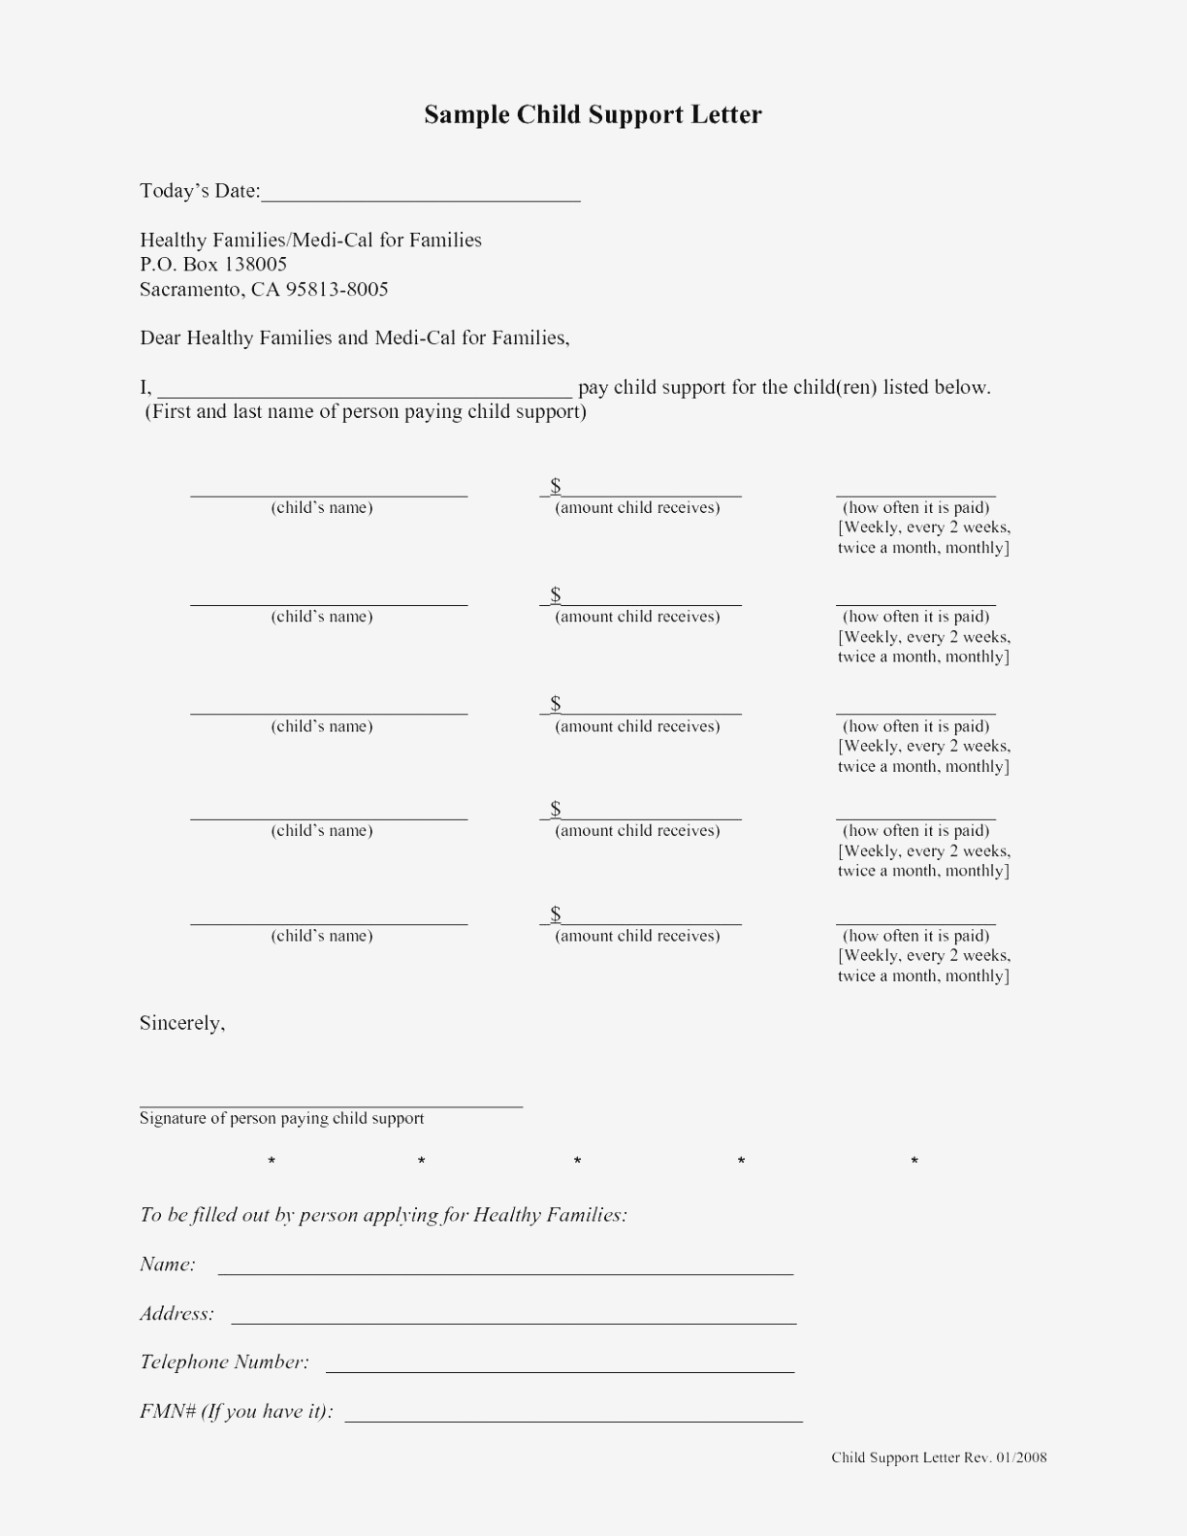 Sample Child Support Agreement Child Support Agreement Form Five Shocking Facts About Information